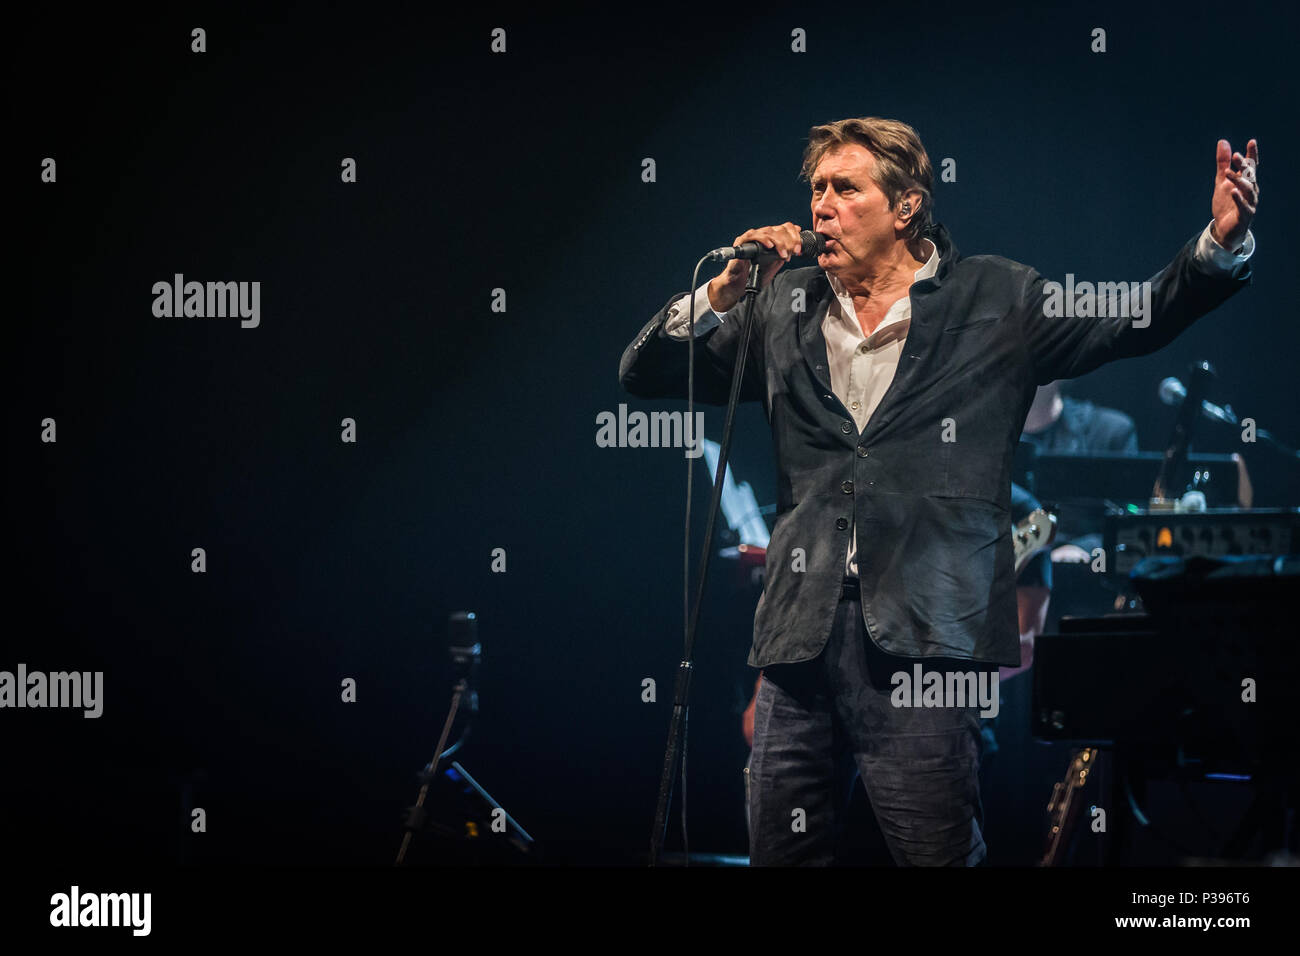 Roskilde, Denmark. June 17, 2018. The English singer and songwriter Bryan Ferry performs a live concert at Roskilde Kongrescenter in Roskilde. (Photo credit: Gonzales Photo - Thomas Rasmussen). Credit: Gonzales Photo/Alamy Live News Stock Photo